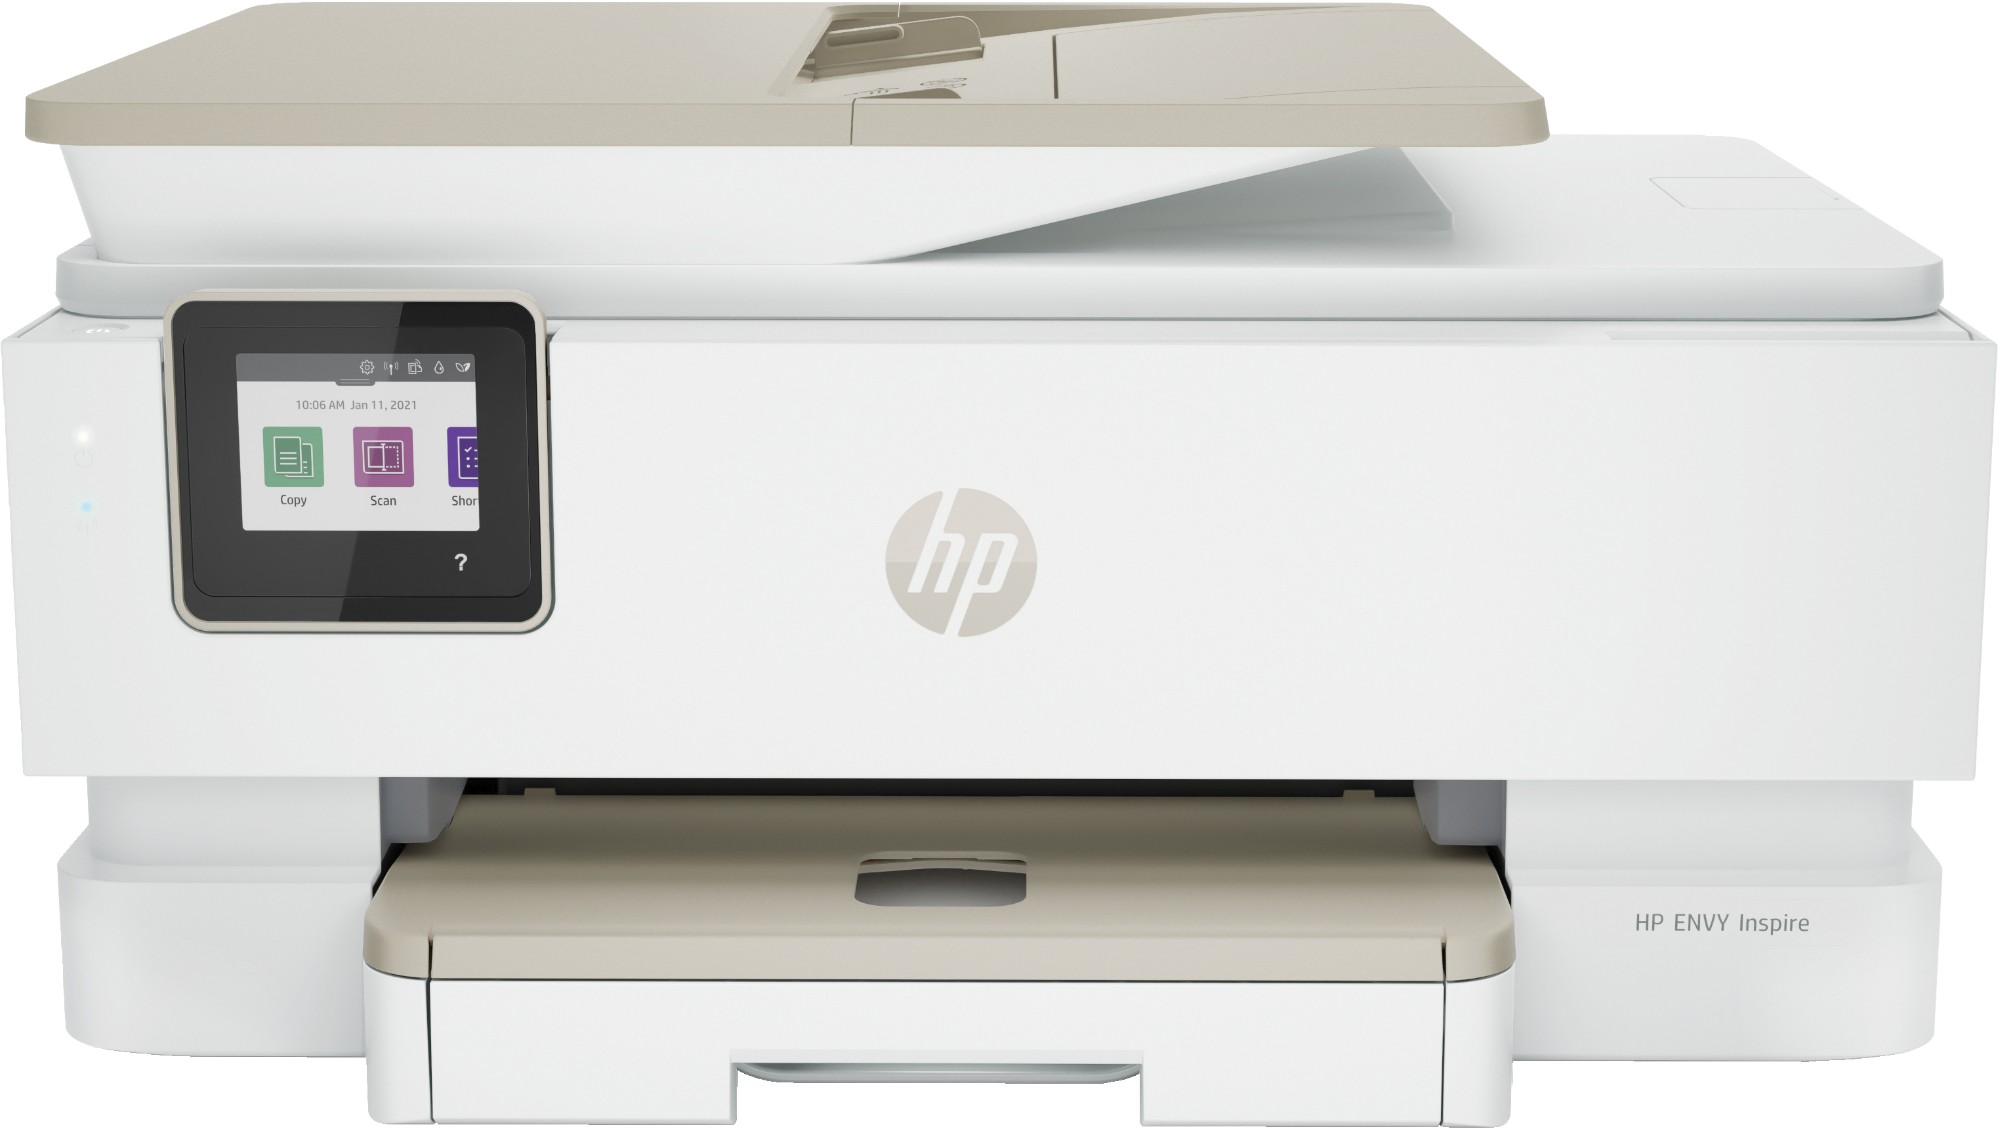 HP ENVY HP Inspire 7920e All-in-One Printer, Colour, Printer for Home and home office, Print, copy, scan, Wireless; HP+; HP Instant Ink eligible; Automatic document feeder